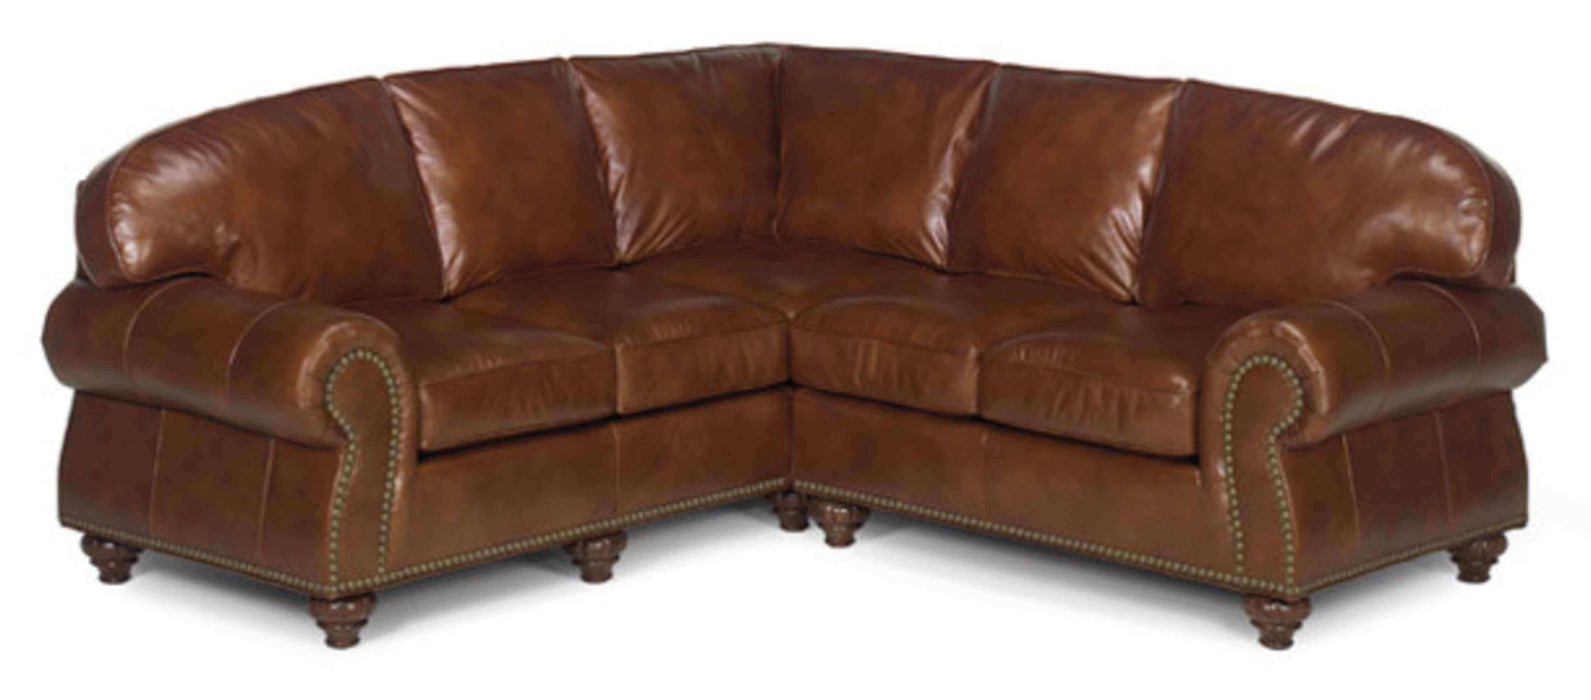 Branson Leather Sectional | American Heirloom | Wellington's Fine Leather Furniture